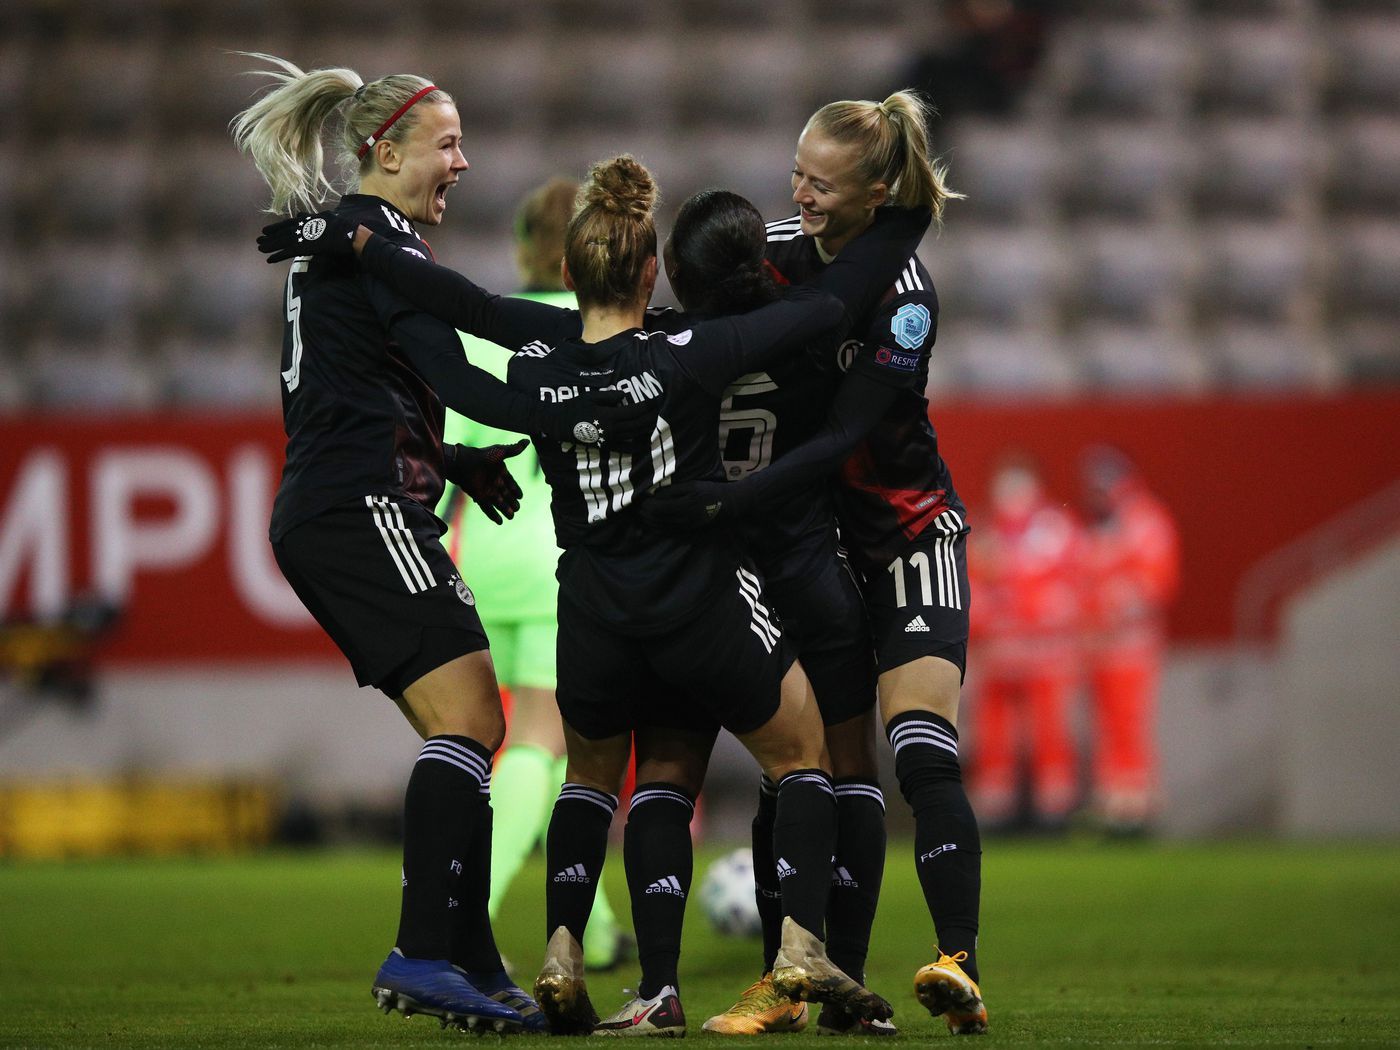 Bayern Munich Frauen Dominate Ajax 3 0 To Advance In The UEFA Women's Champions League: Initial Reactions And Observations Football Works